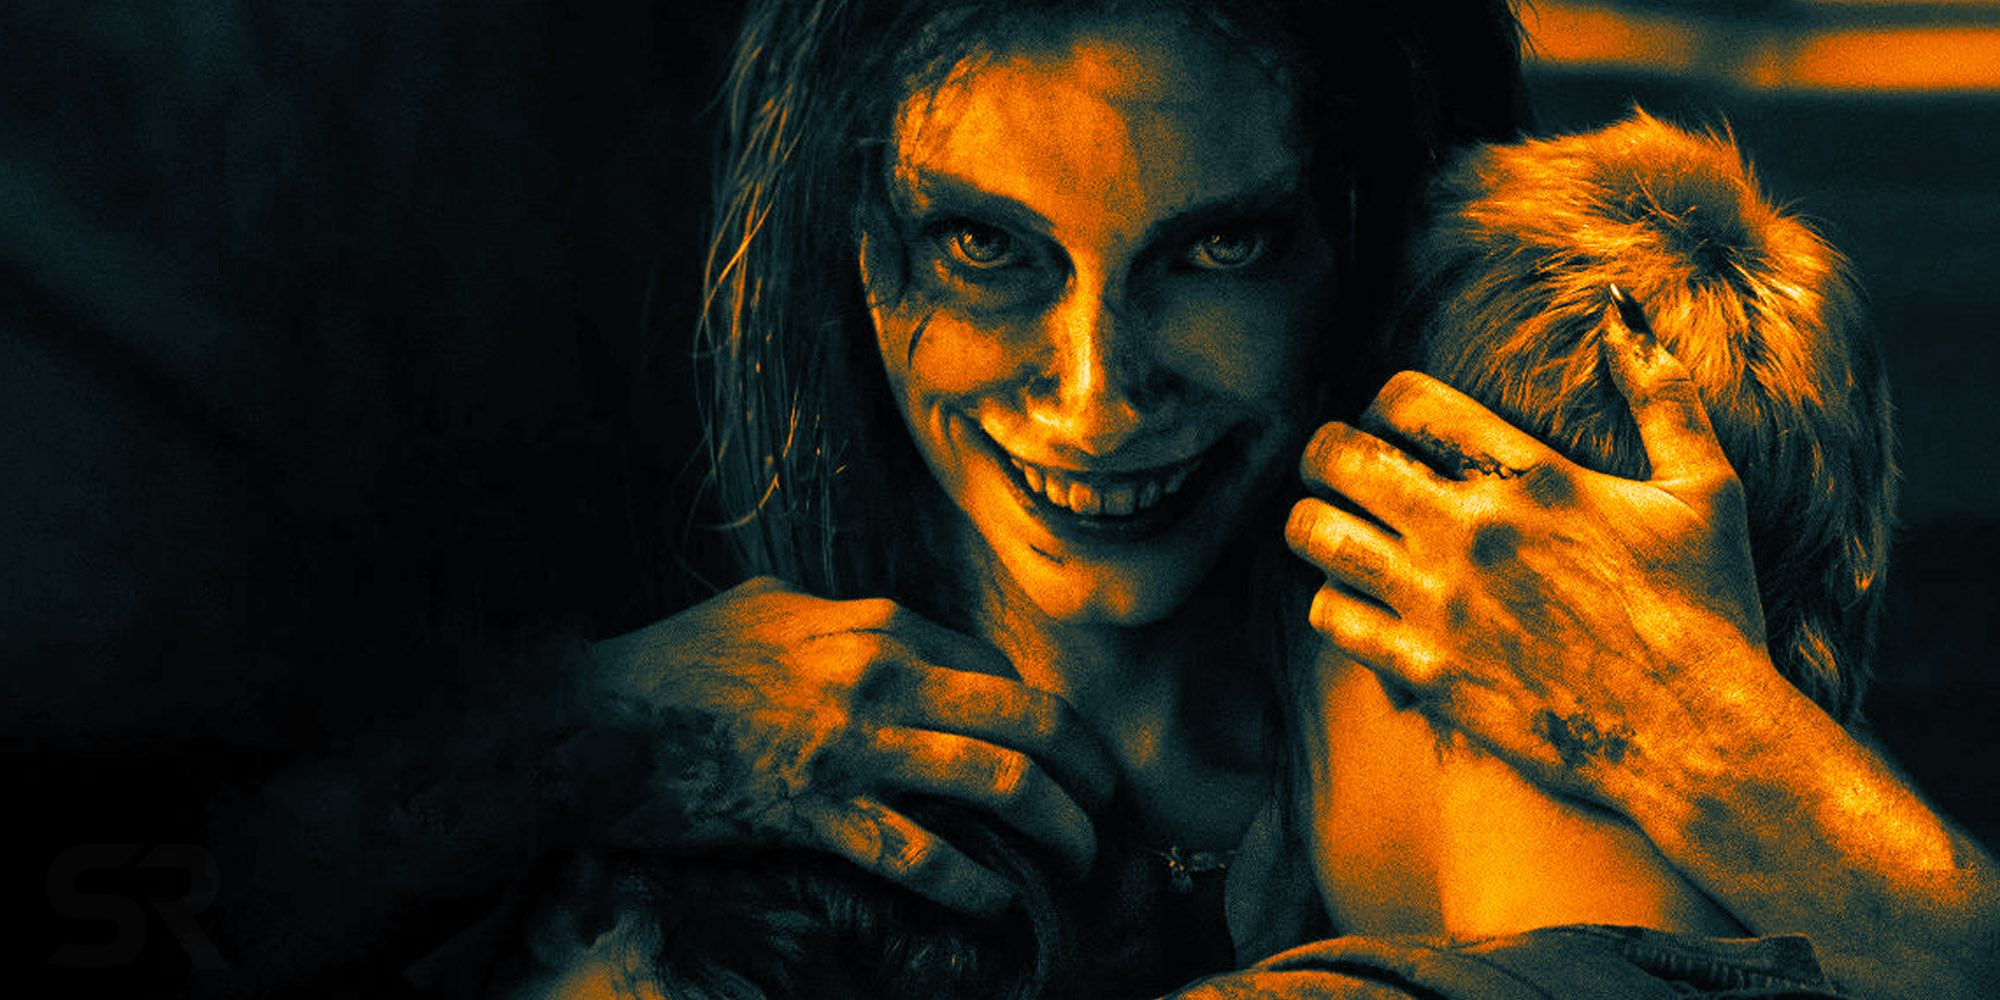 Evil Dead Rise Is Streaming on HBO Max Starting June 23rd!